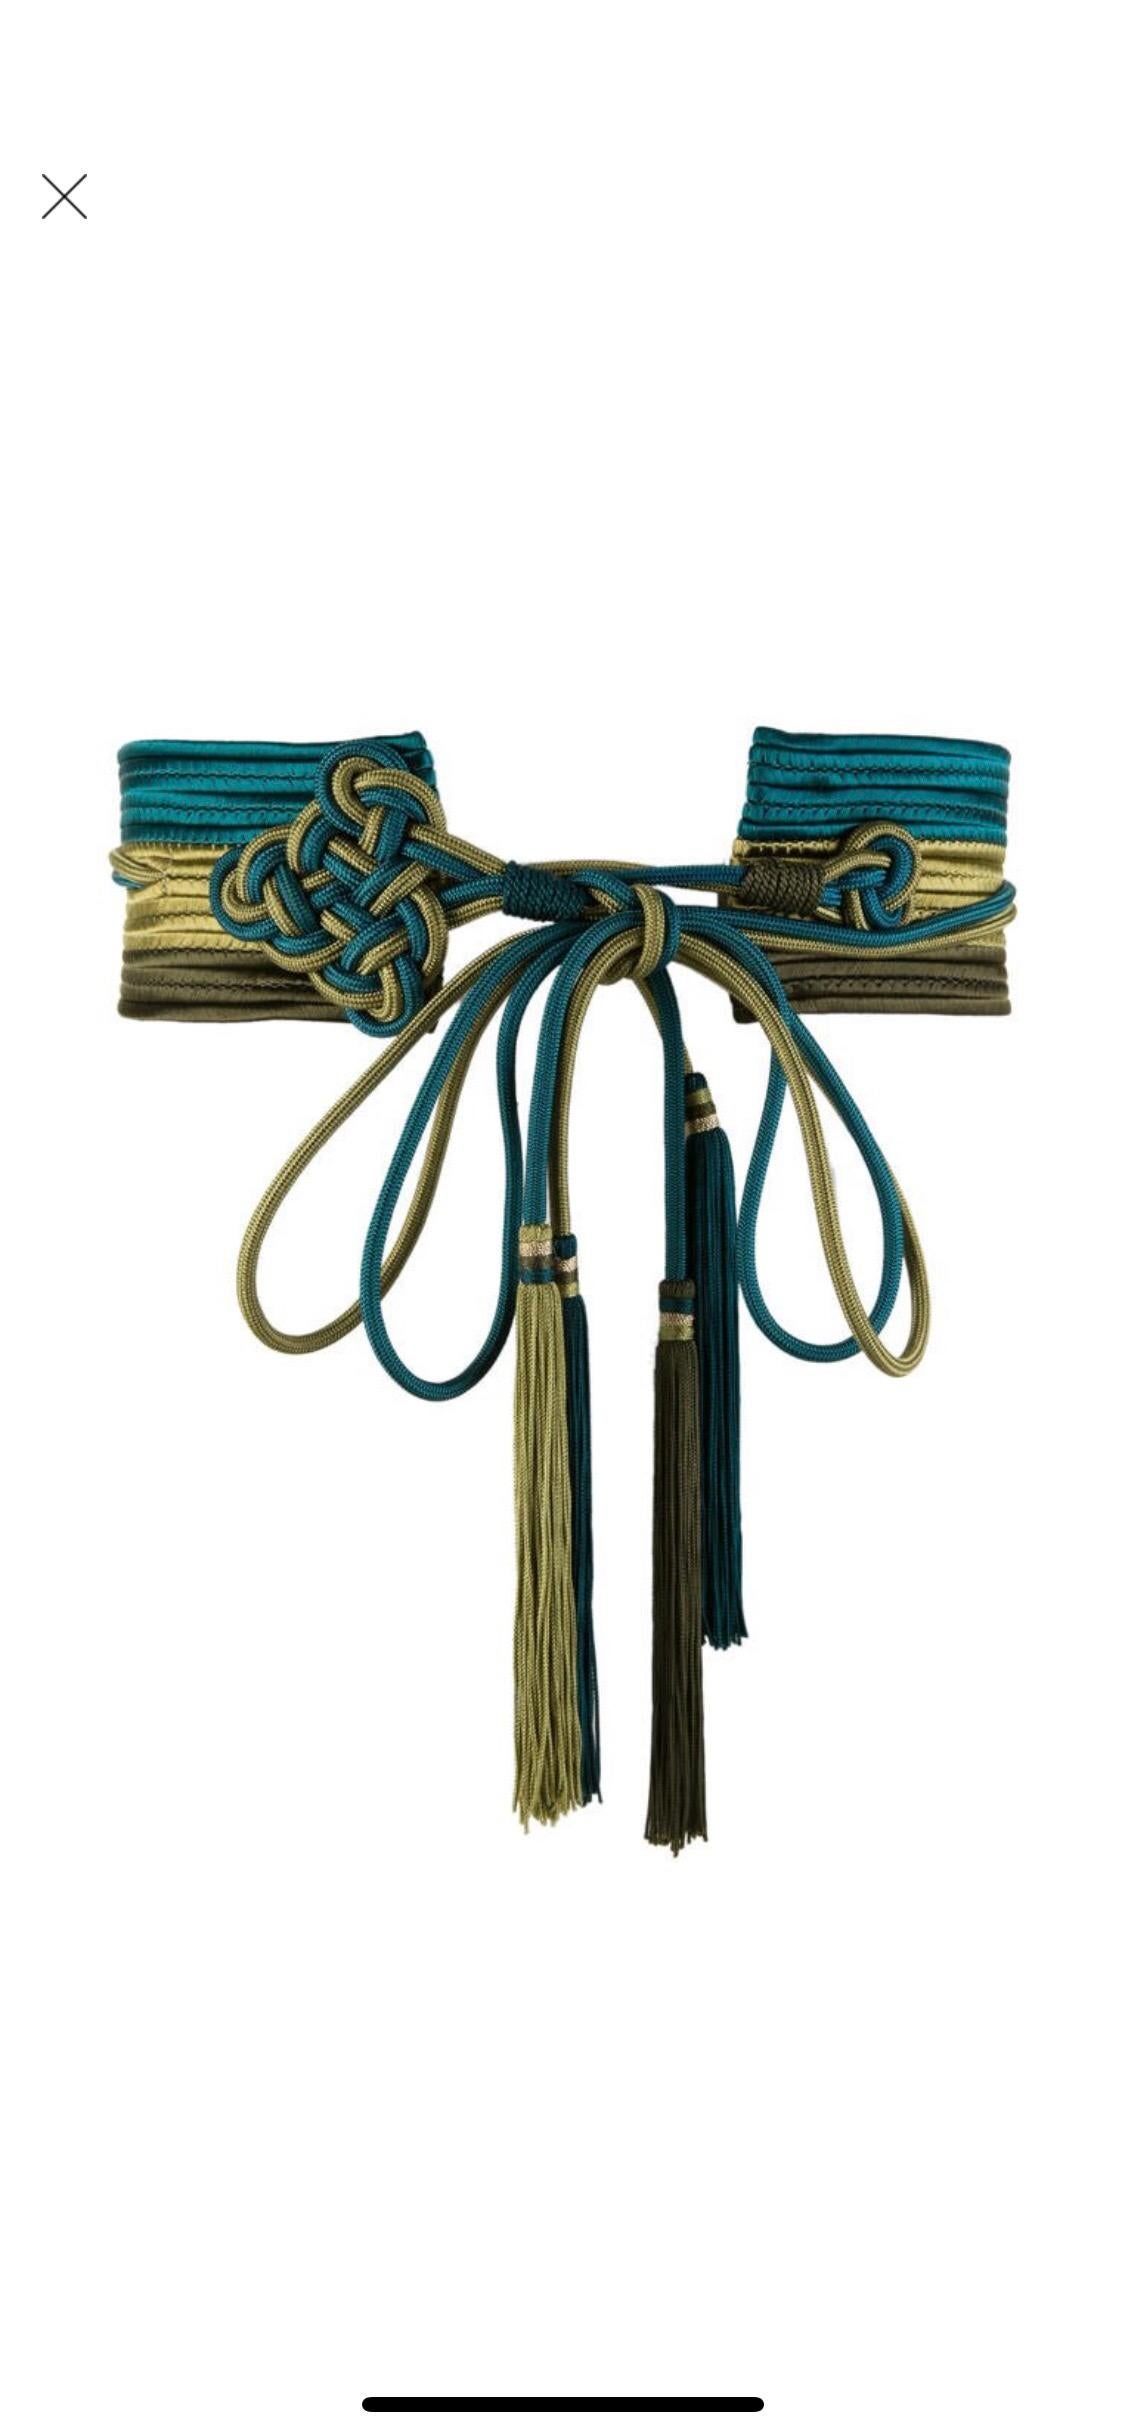 The suit, the safari jacket, the peasant dress—Yves Saint Laurent was a master at seeing the high-fashion potential of that which others might have dismissed. This passementerie belt is an example of his design genius. Passementerie, the art of